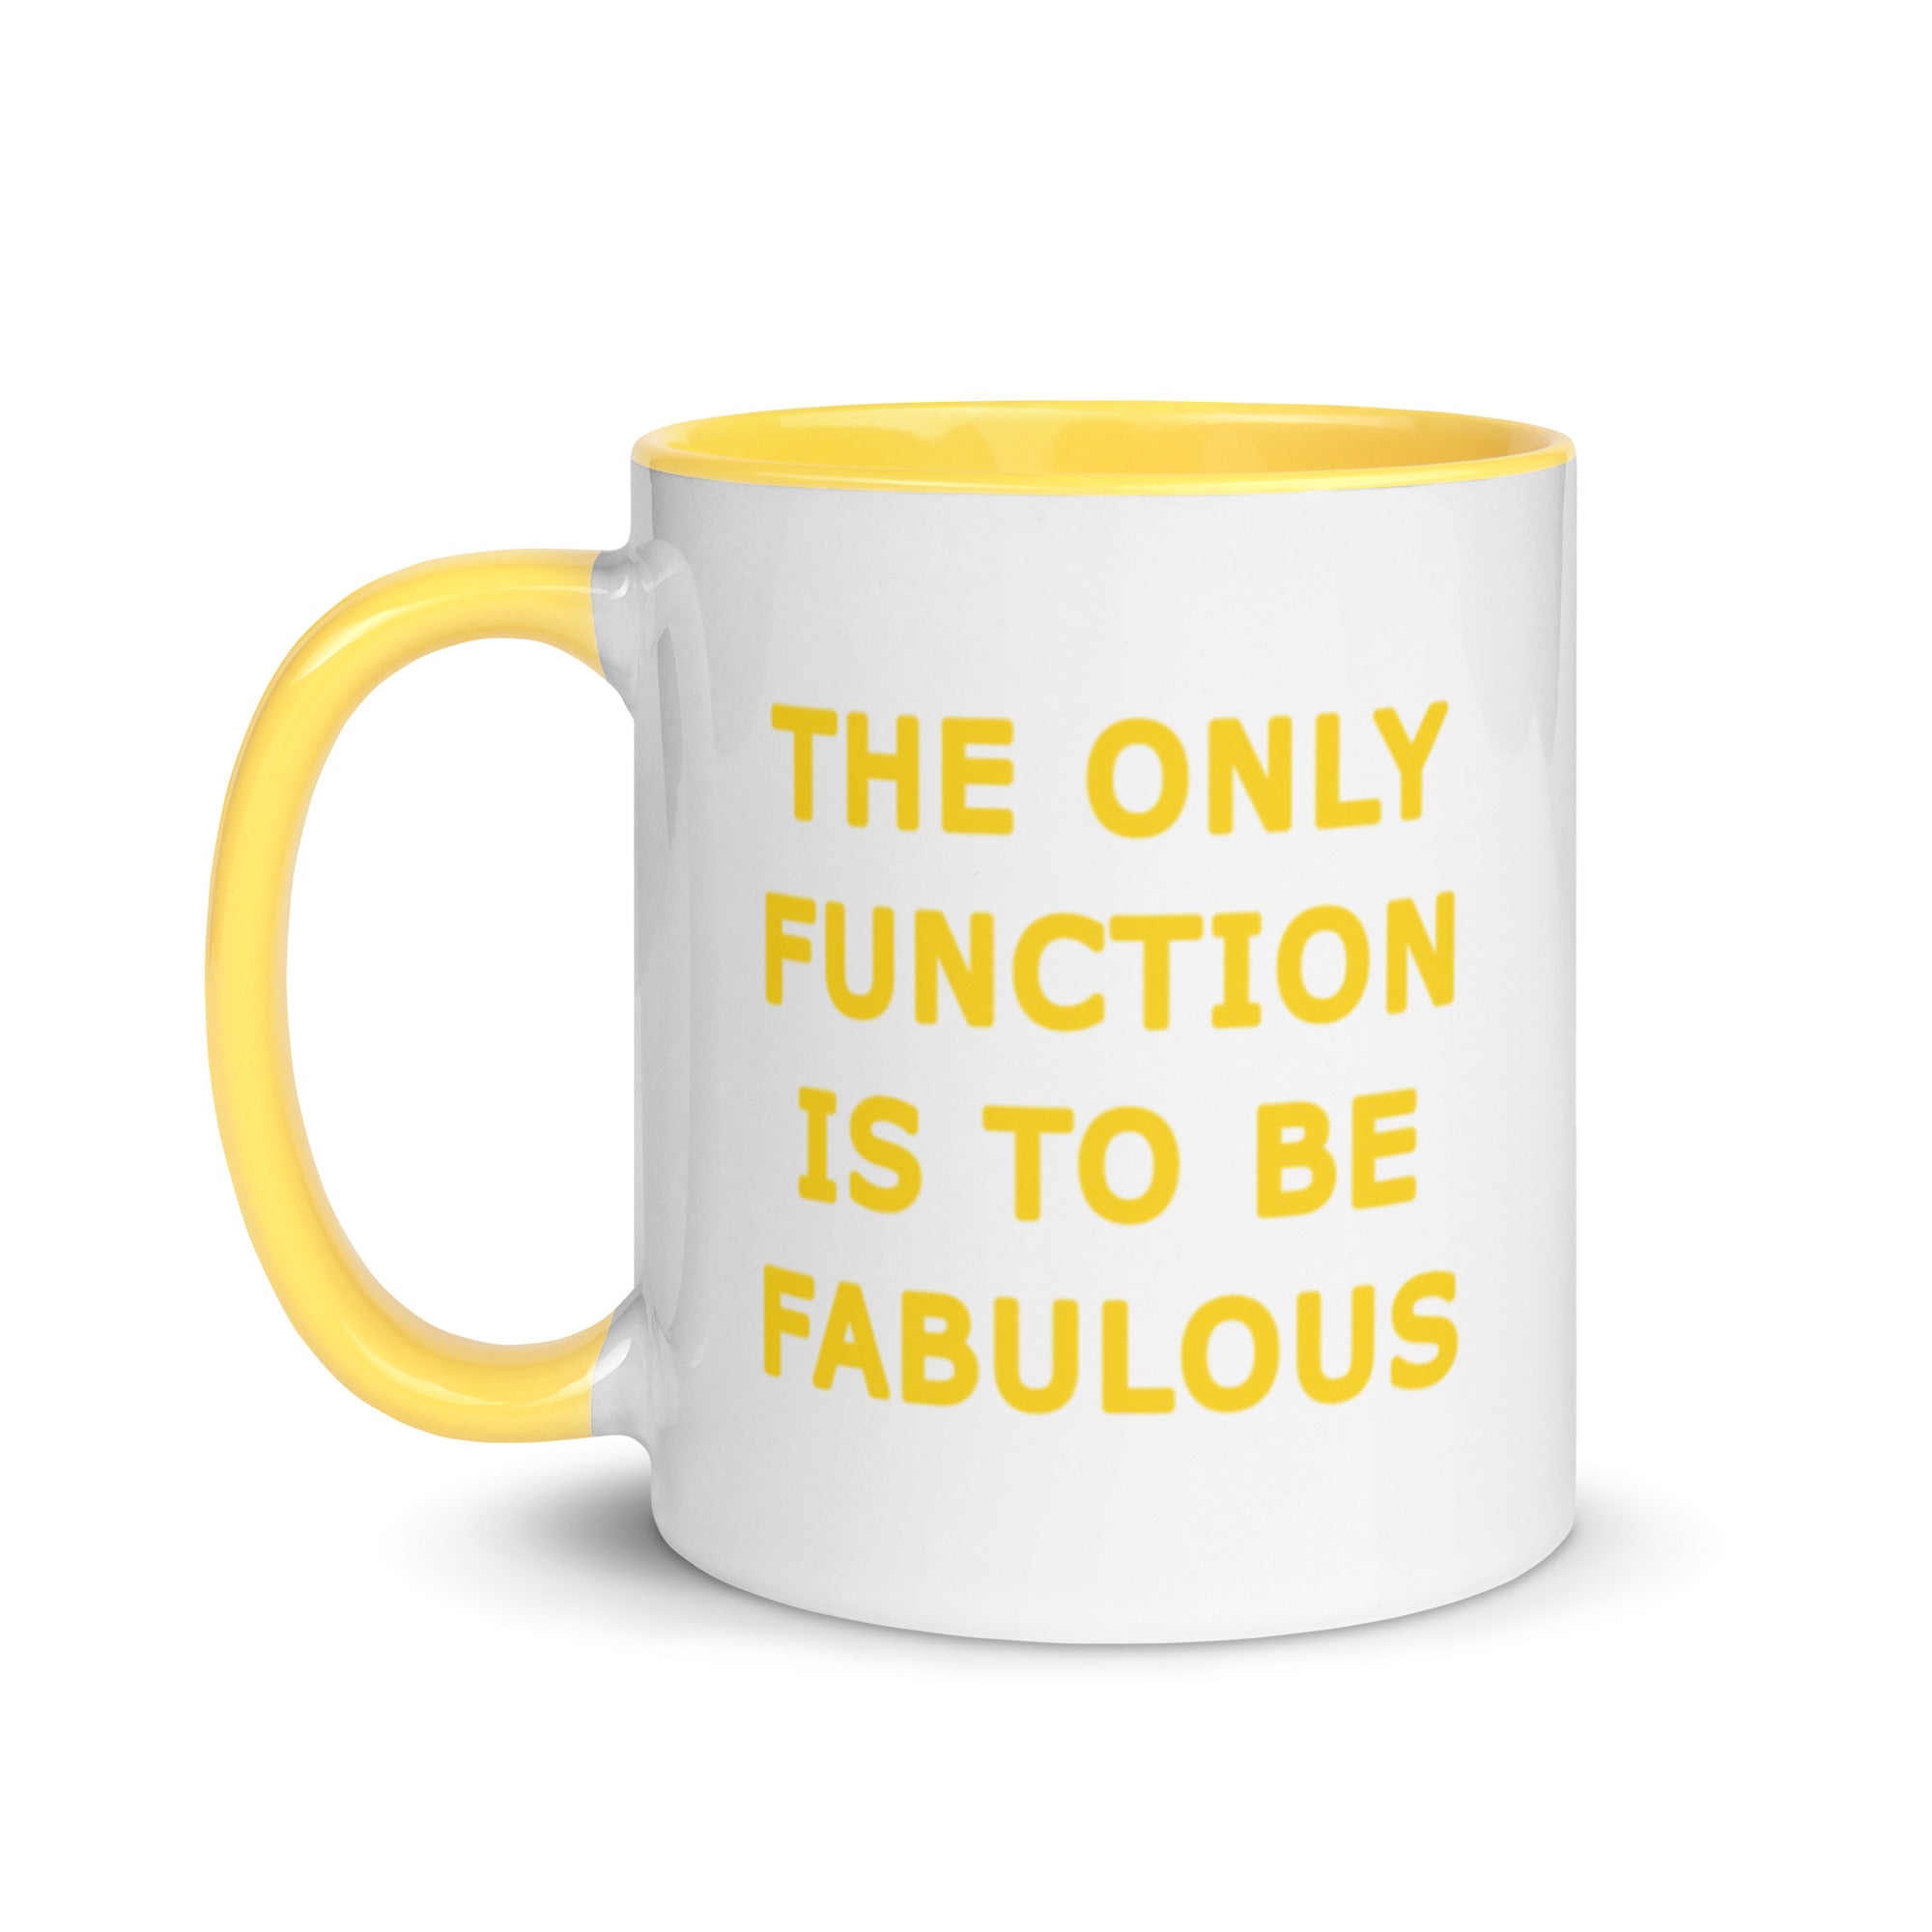 The Only Function Is To Be Fabulous Blue, Orange, Pink, Black or Yellow Mug